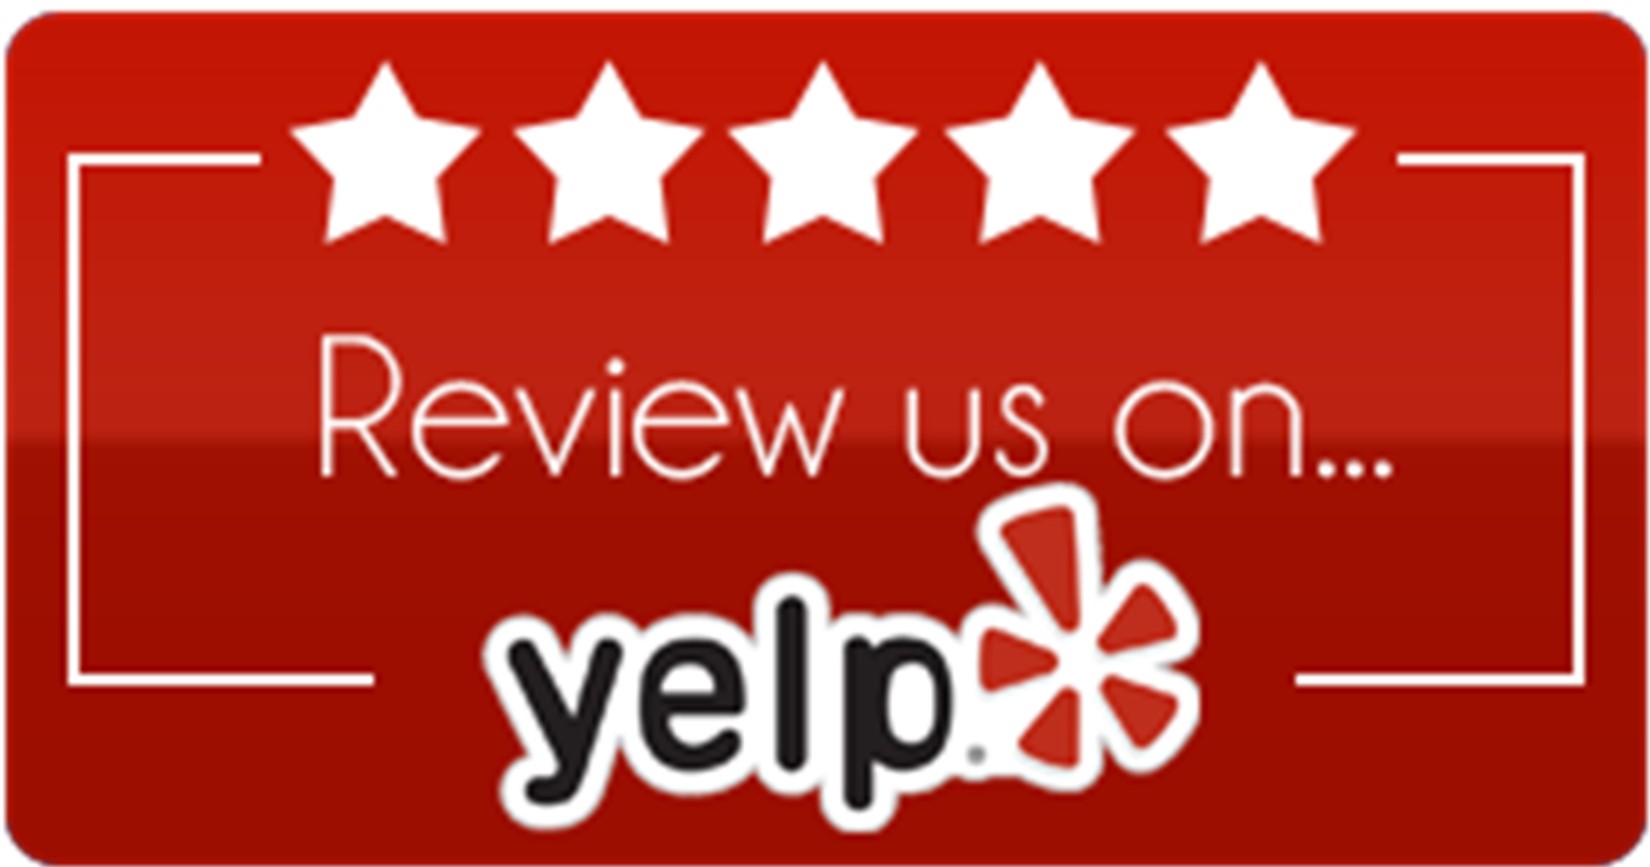 review us on Yelp badge